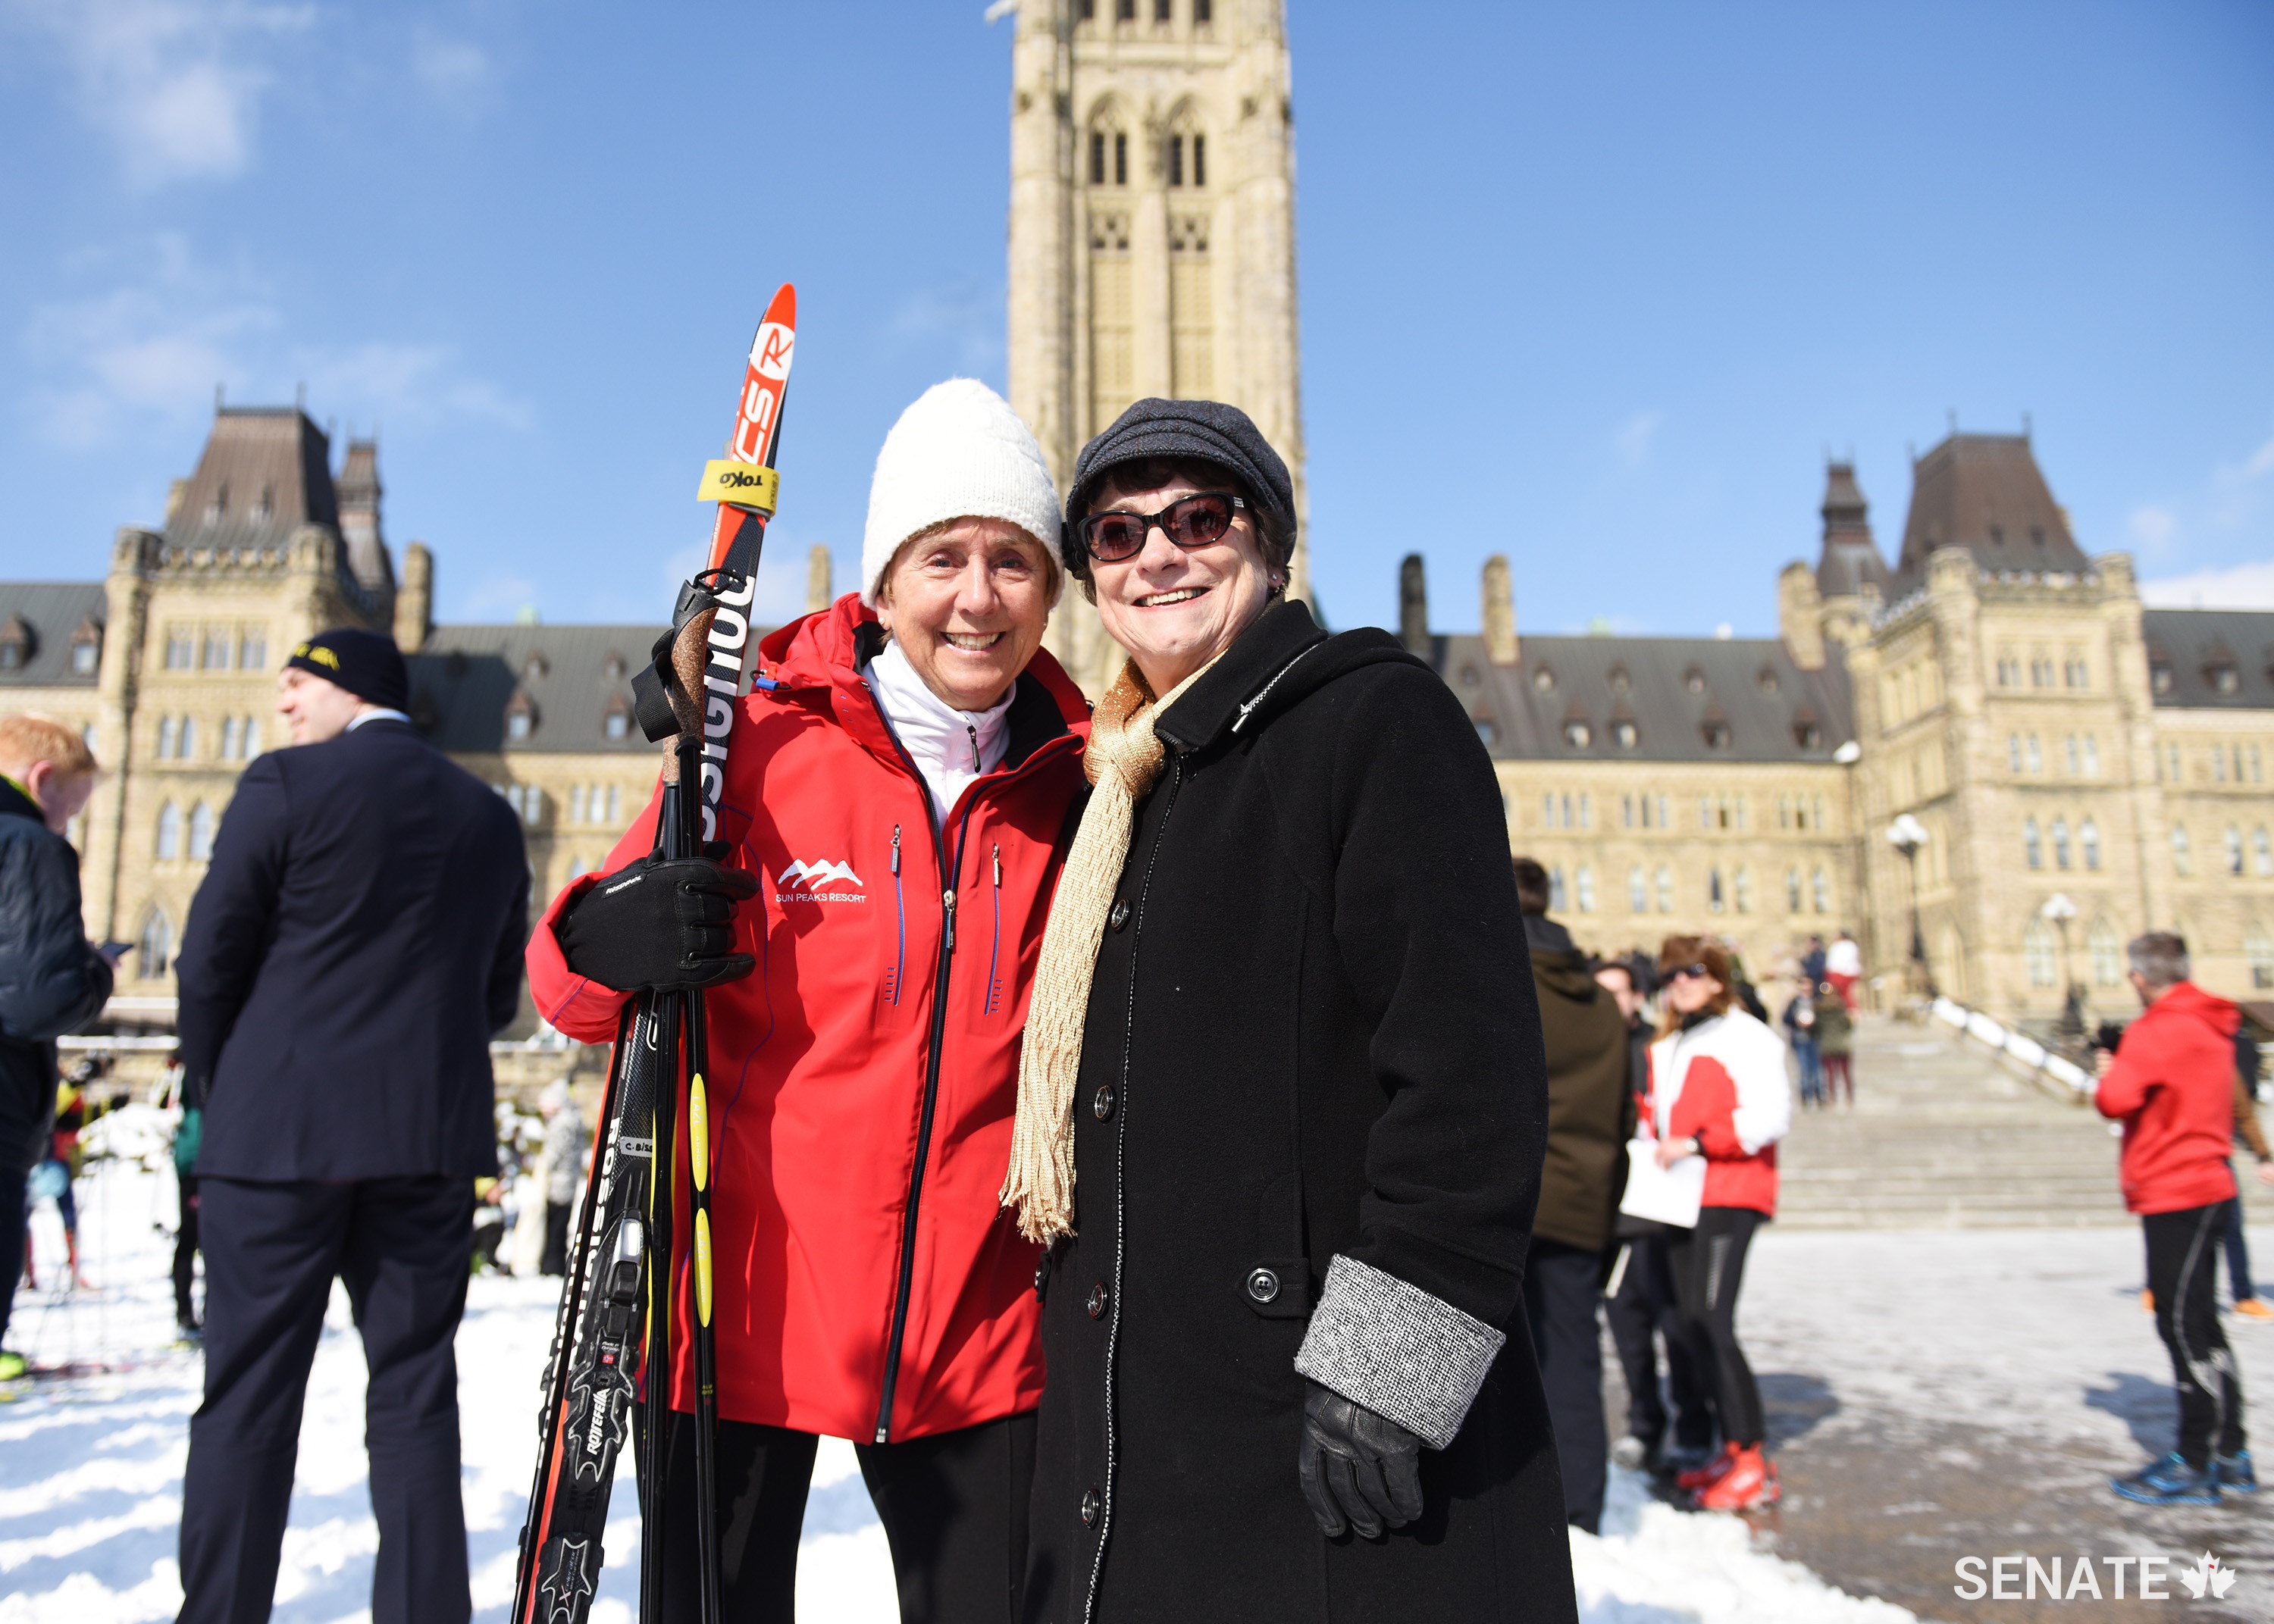 Senators Nancy Greene Raine and Diane Griffin enjoy some February sunshine in Ottawa as they show their support for sport, health and fitness.